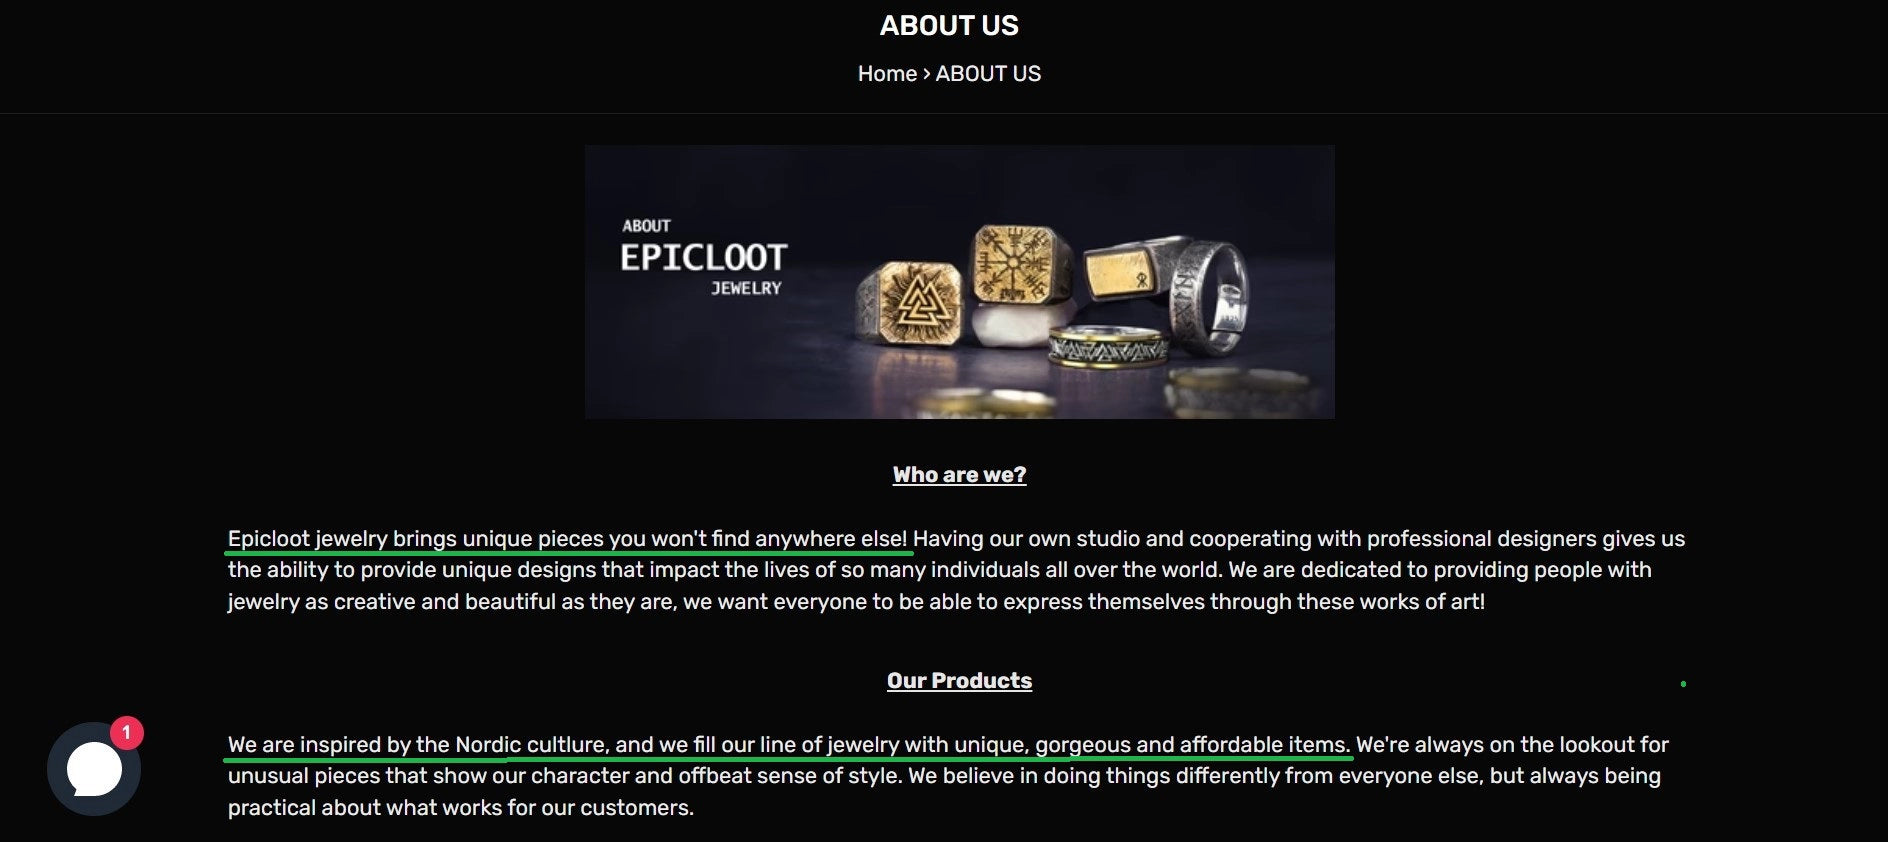 Epic Loot’s About Us page